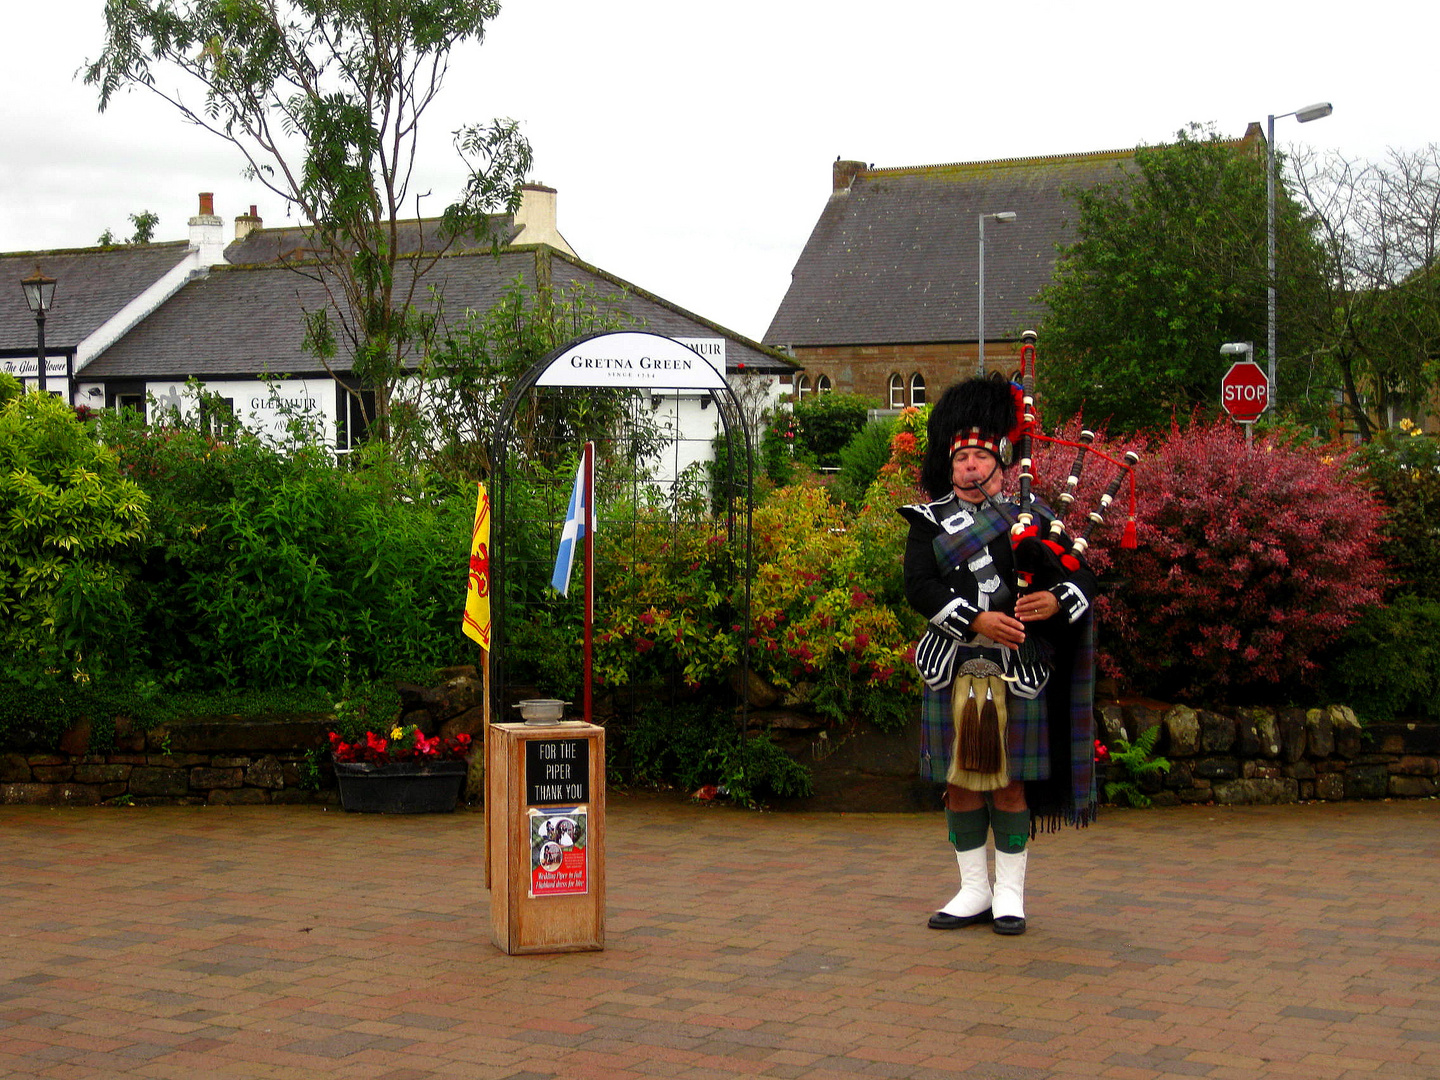 The Piper of Gretna Green